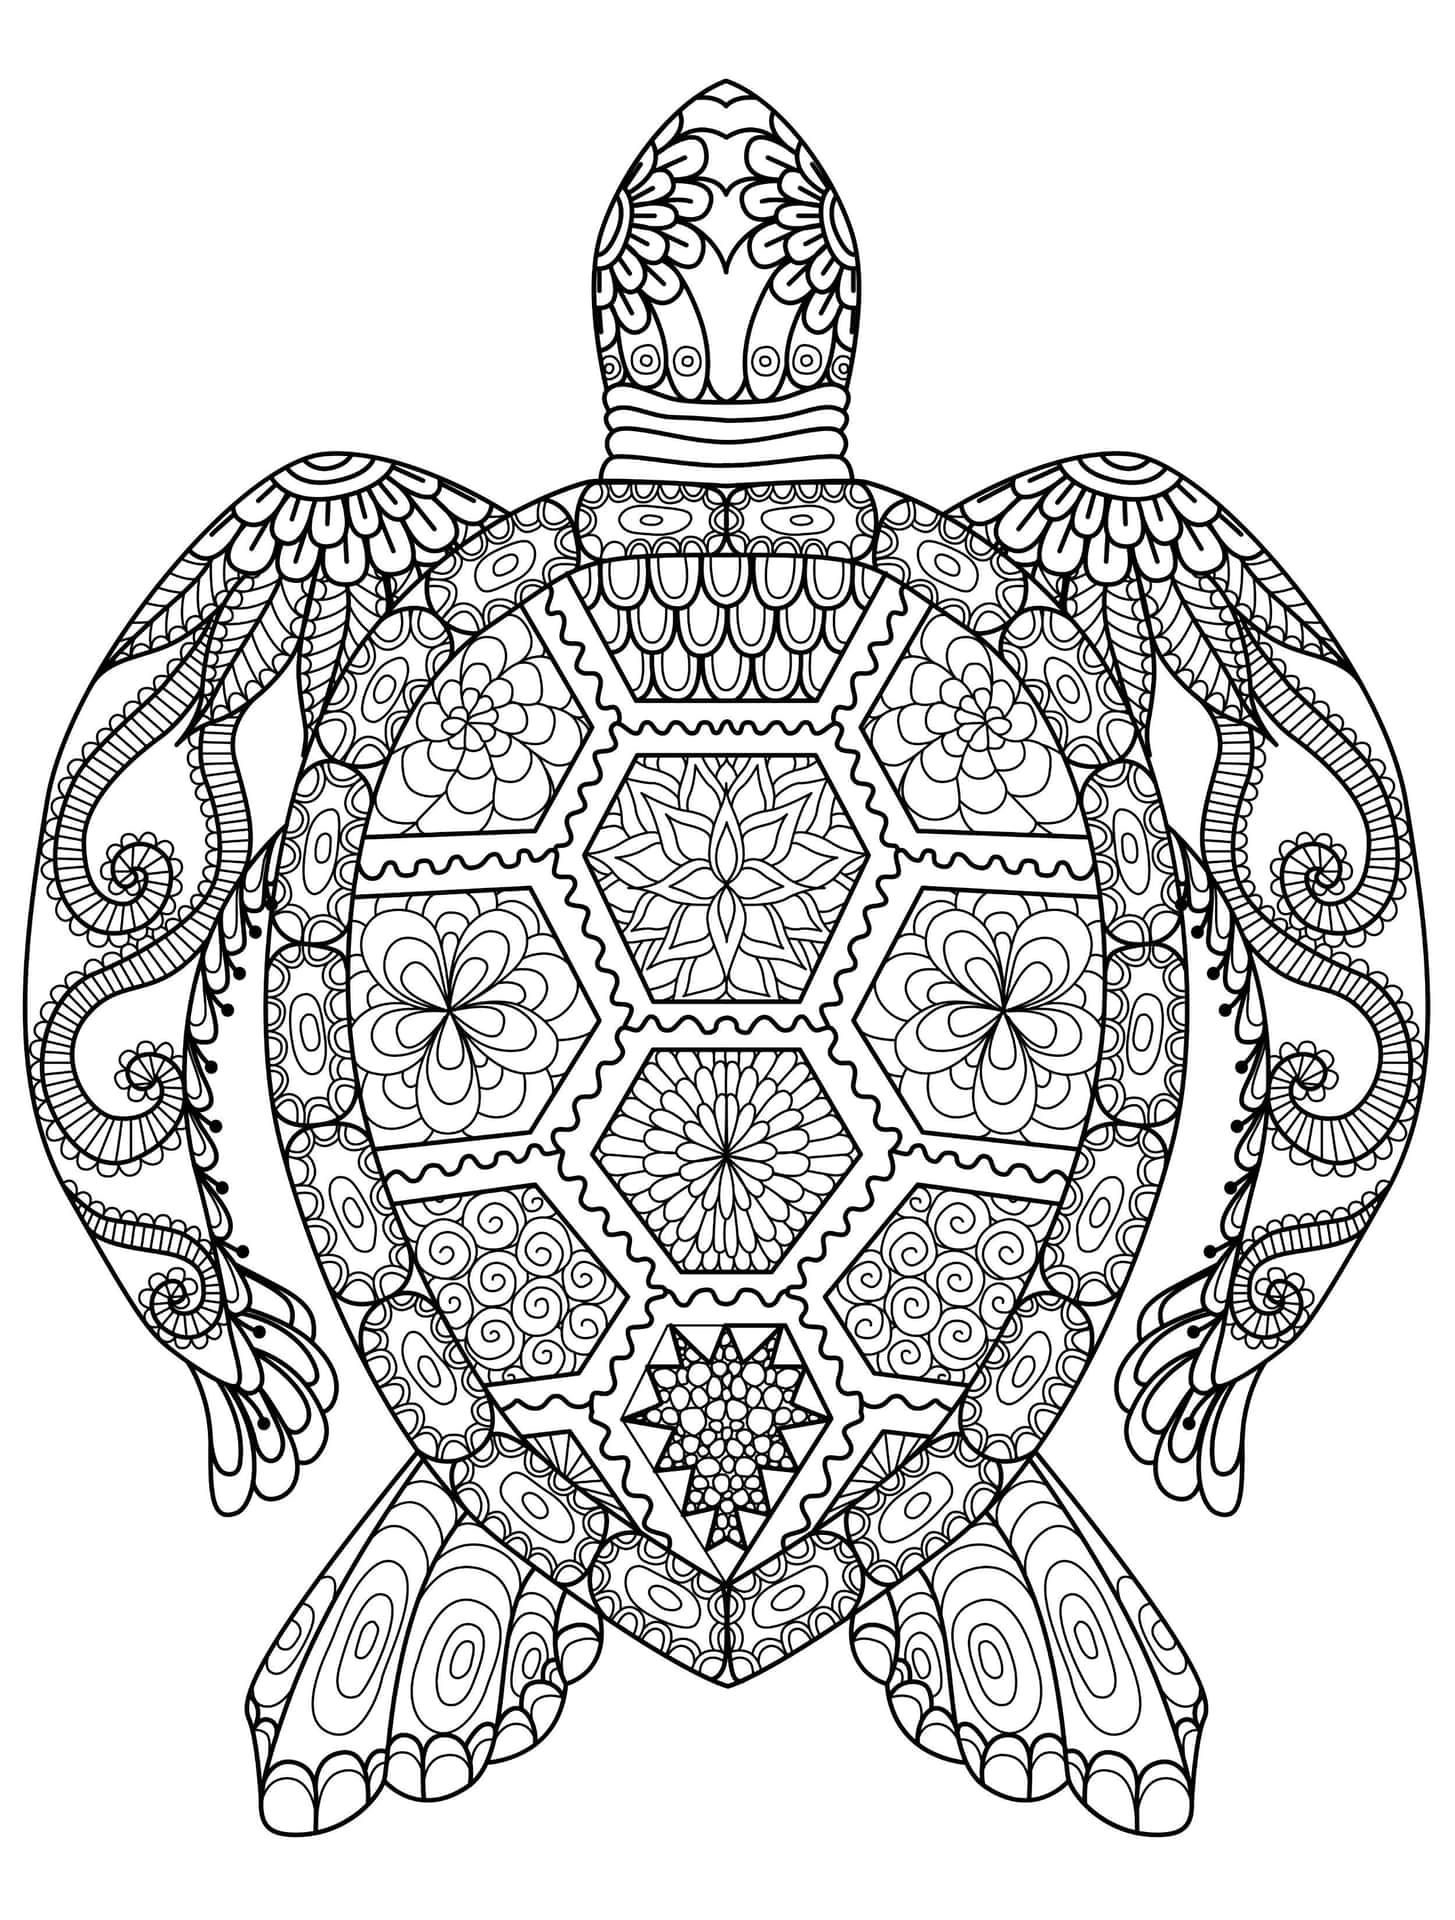 A Turtle Coloring Page With Intricate Designs